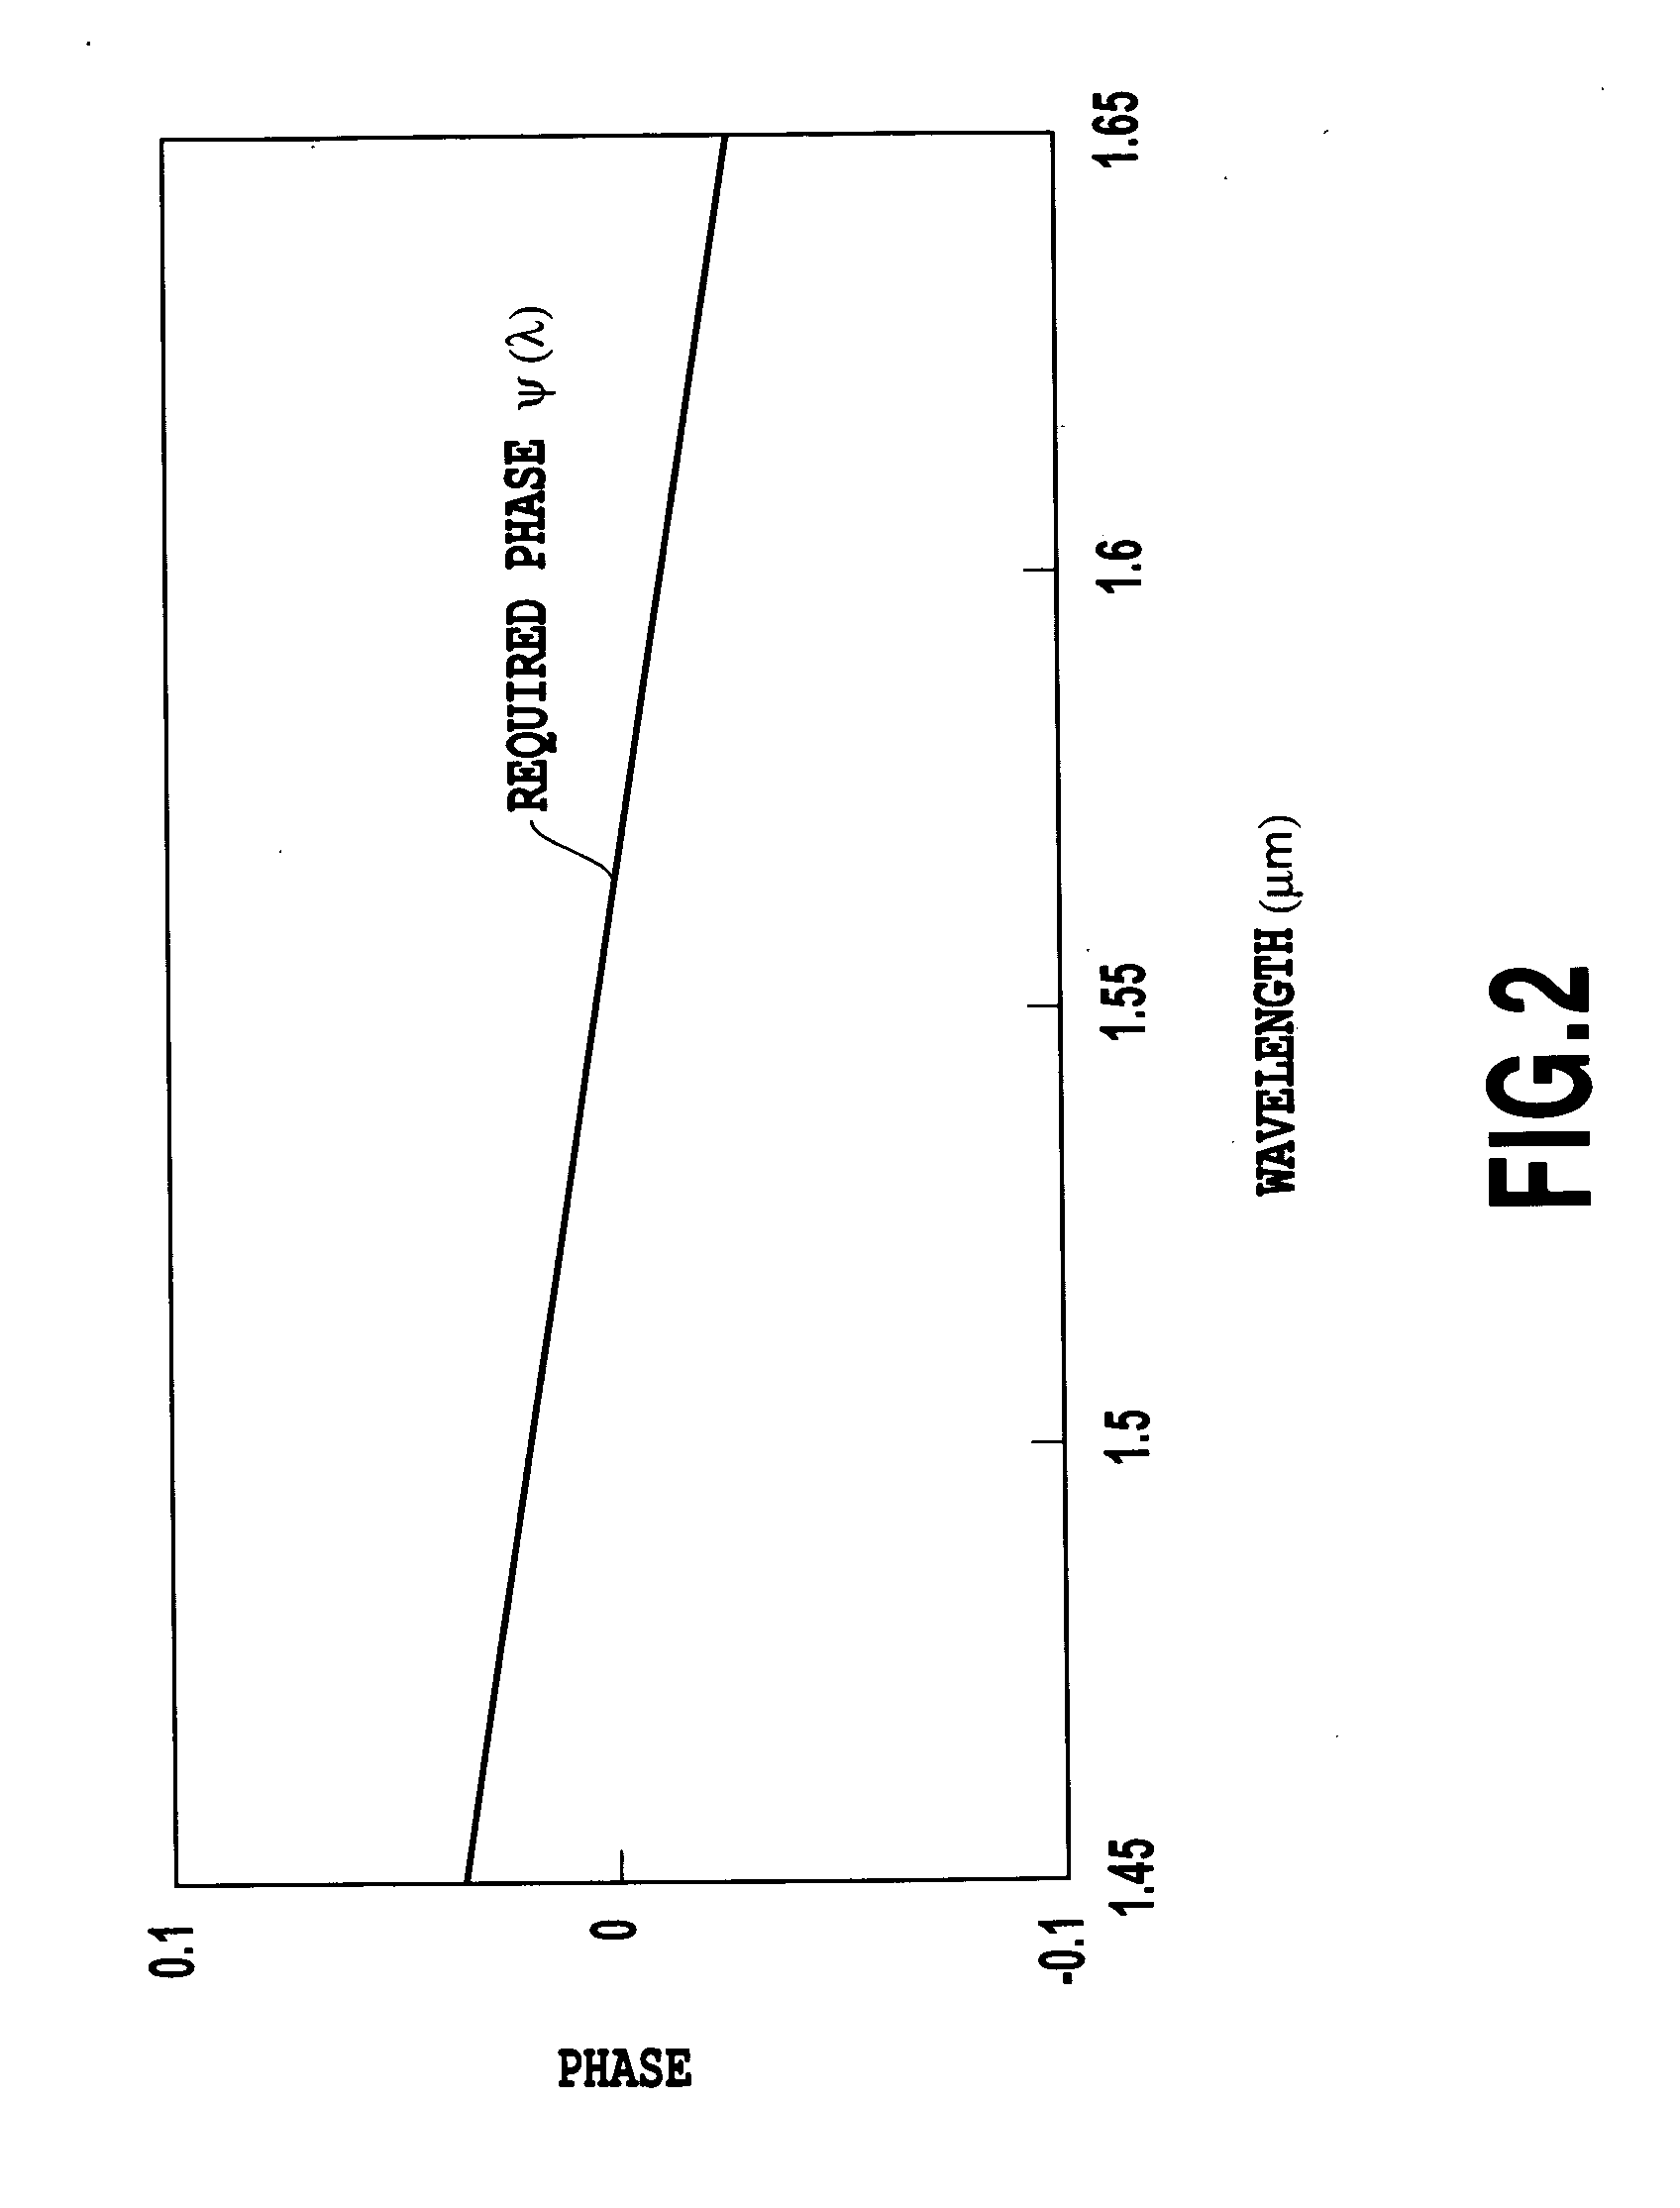 Interference optical switch and variable optical attenuator